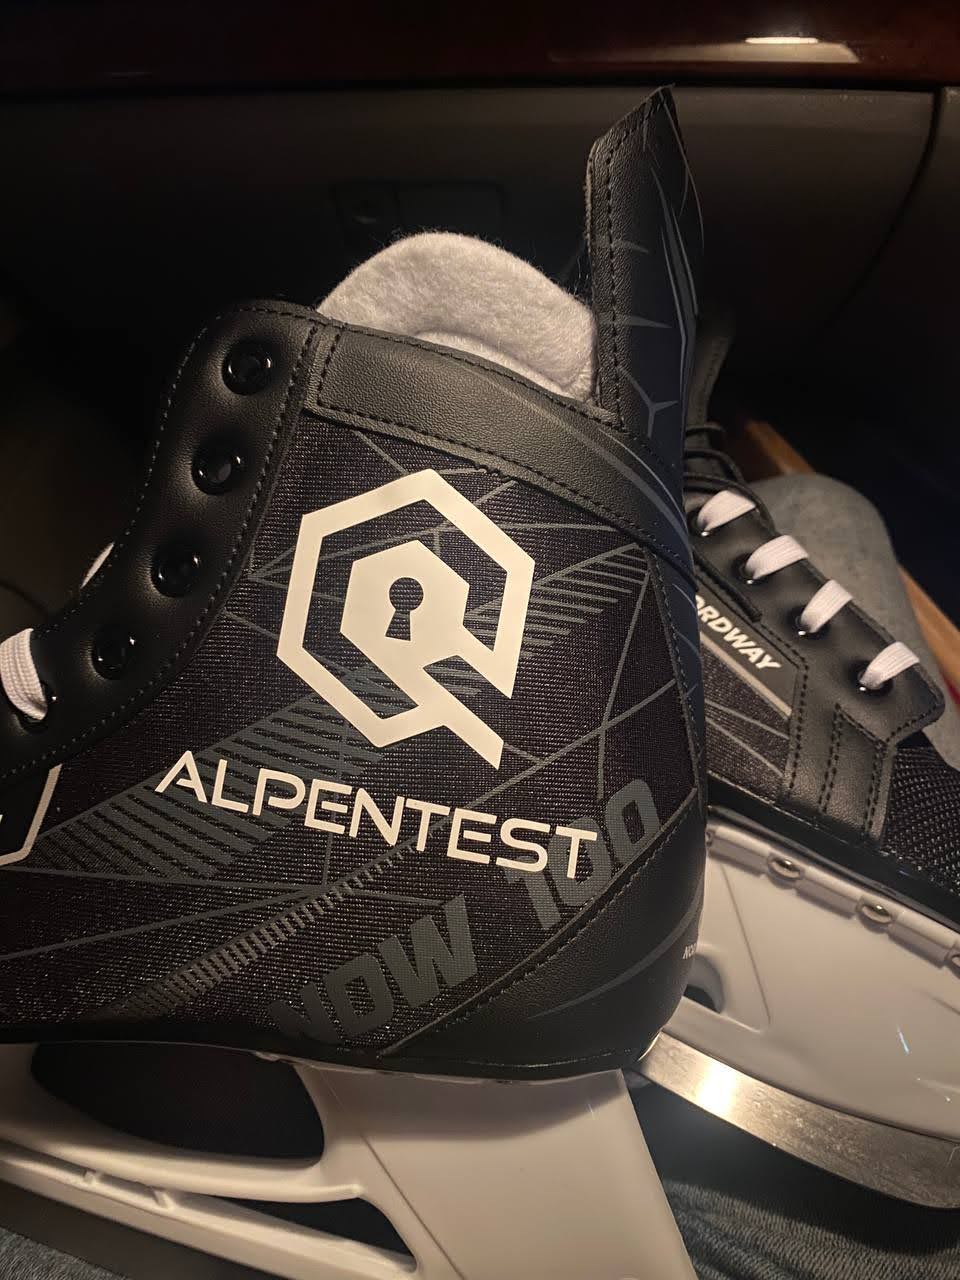 Black ice skate that shows the AlphaLock logo on the side in white